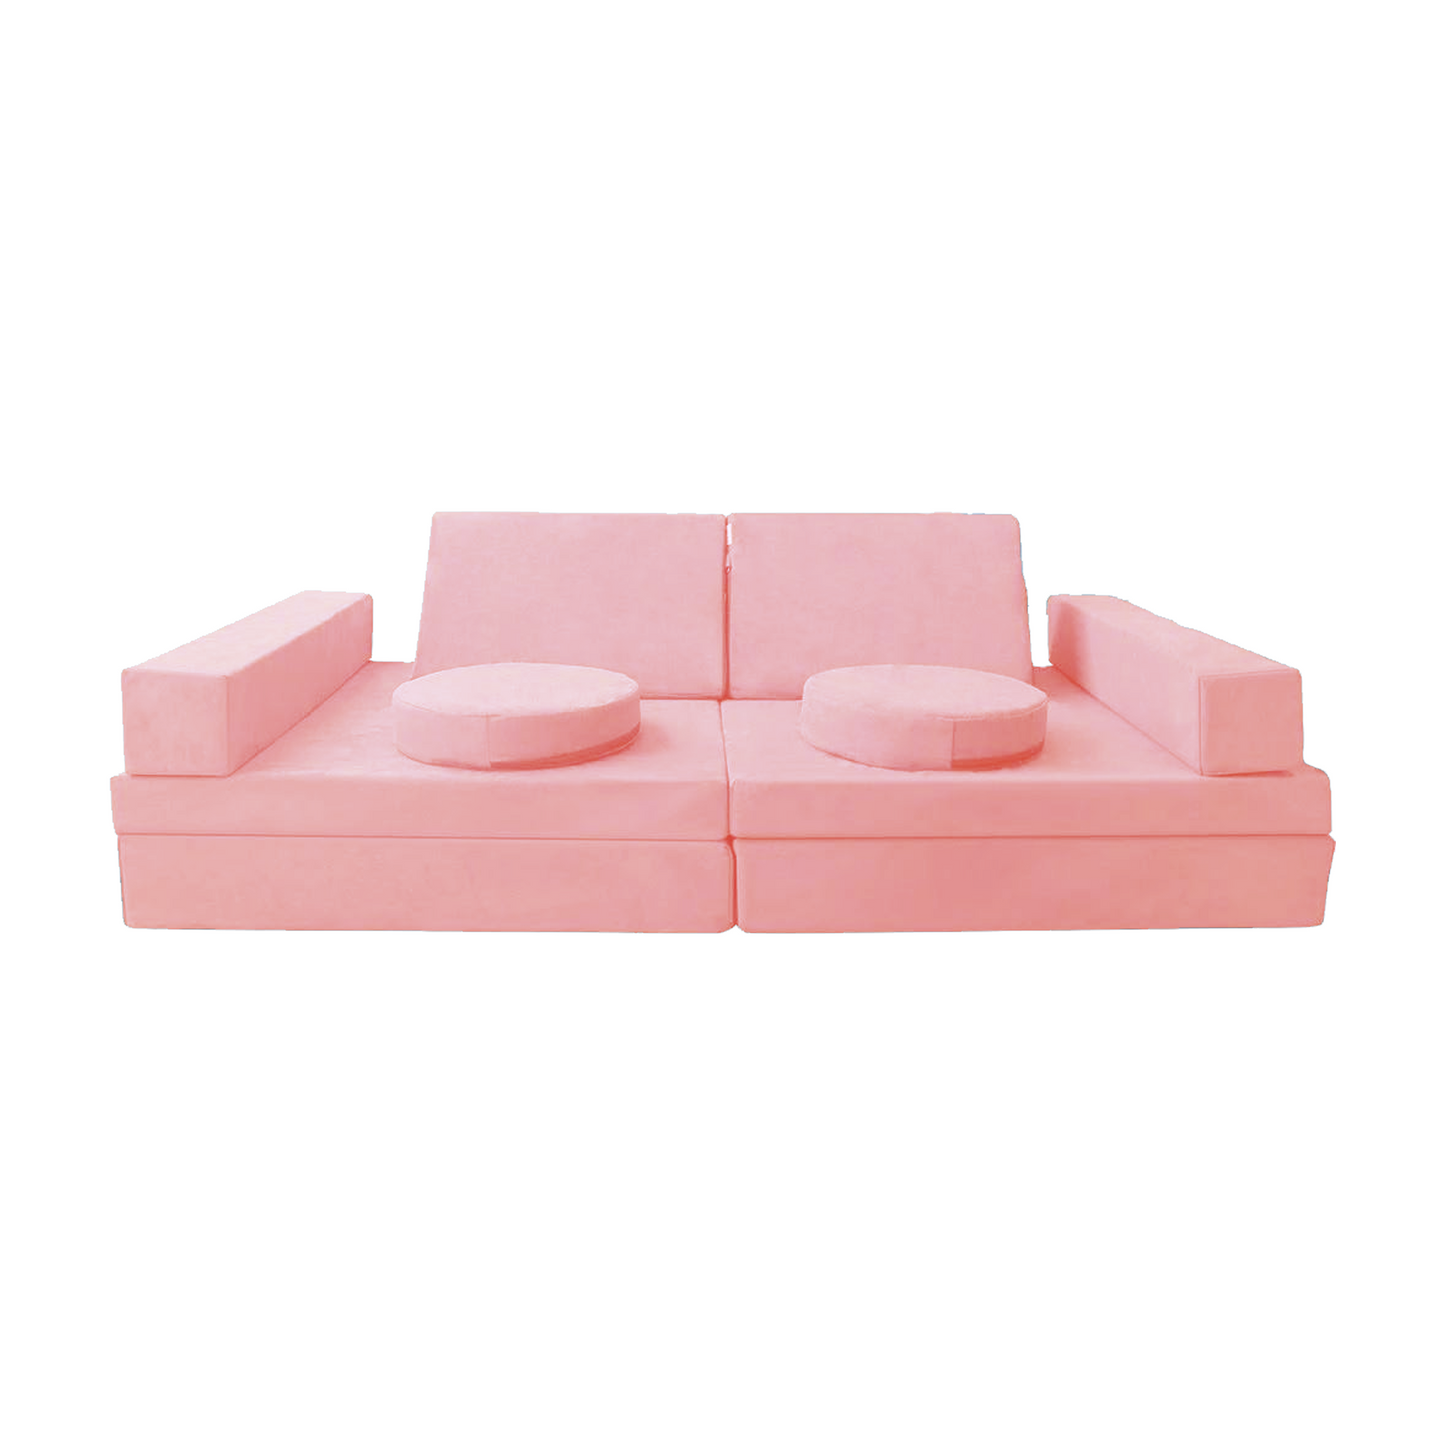 Likha Play Couch - Rosa (Light Pink) with waterproof liner and Sand Beige replacement cover